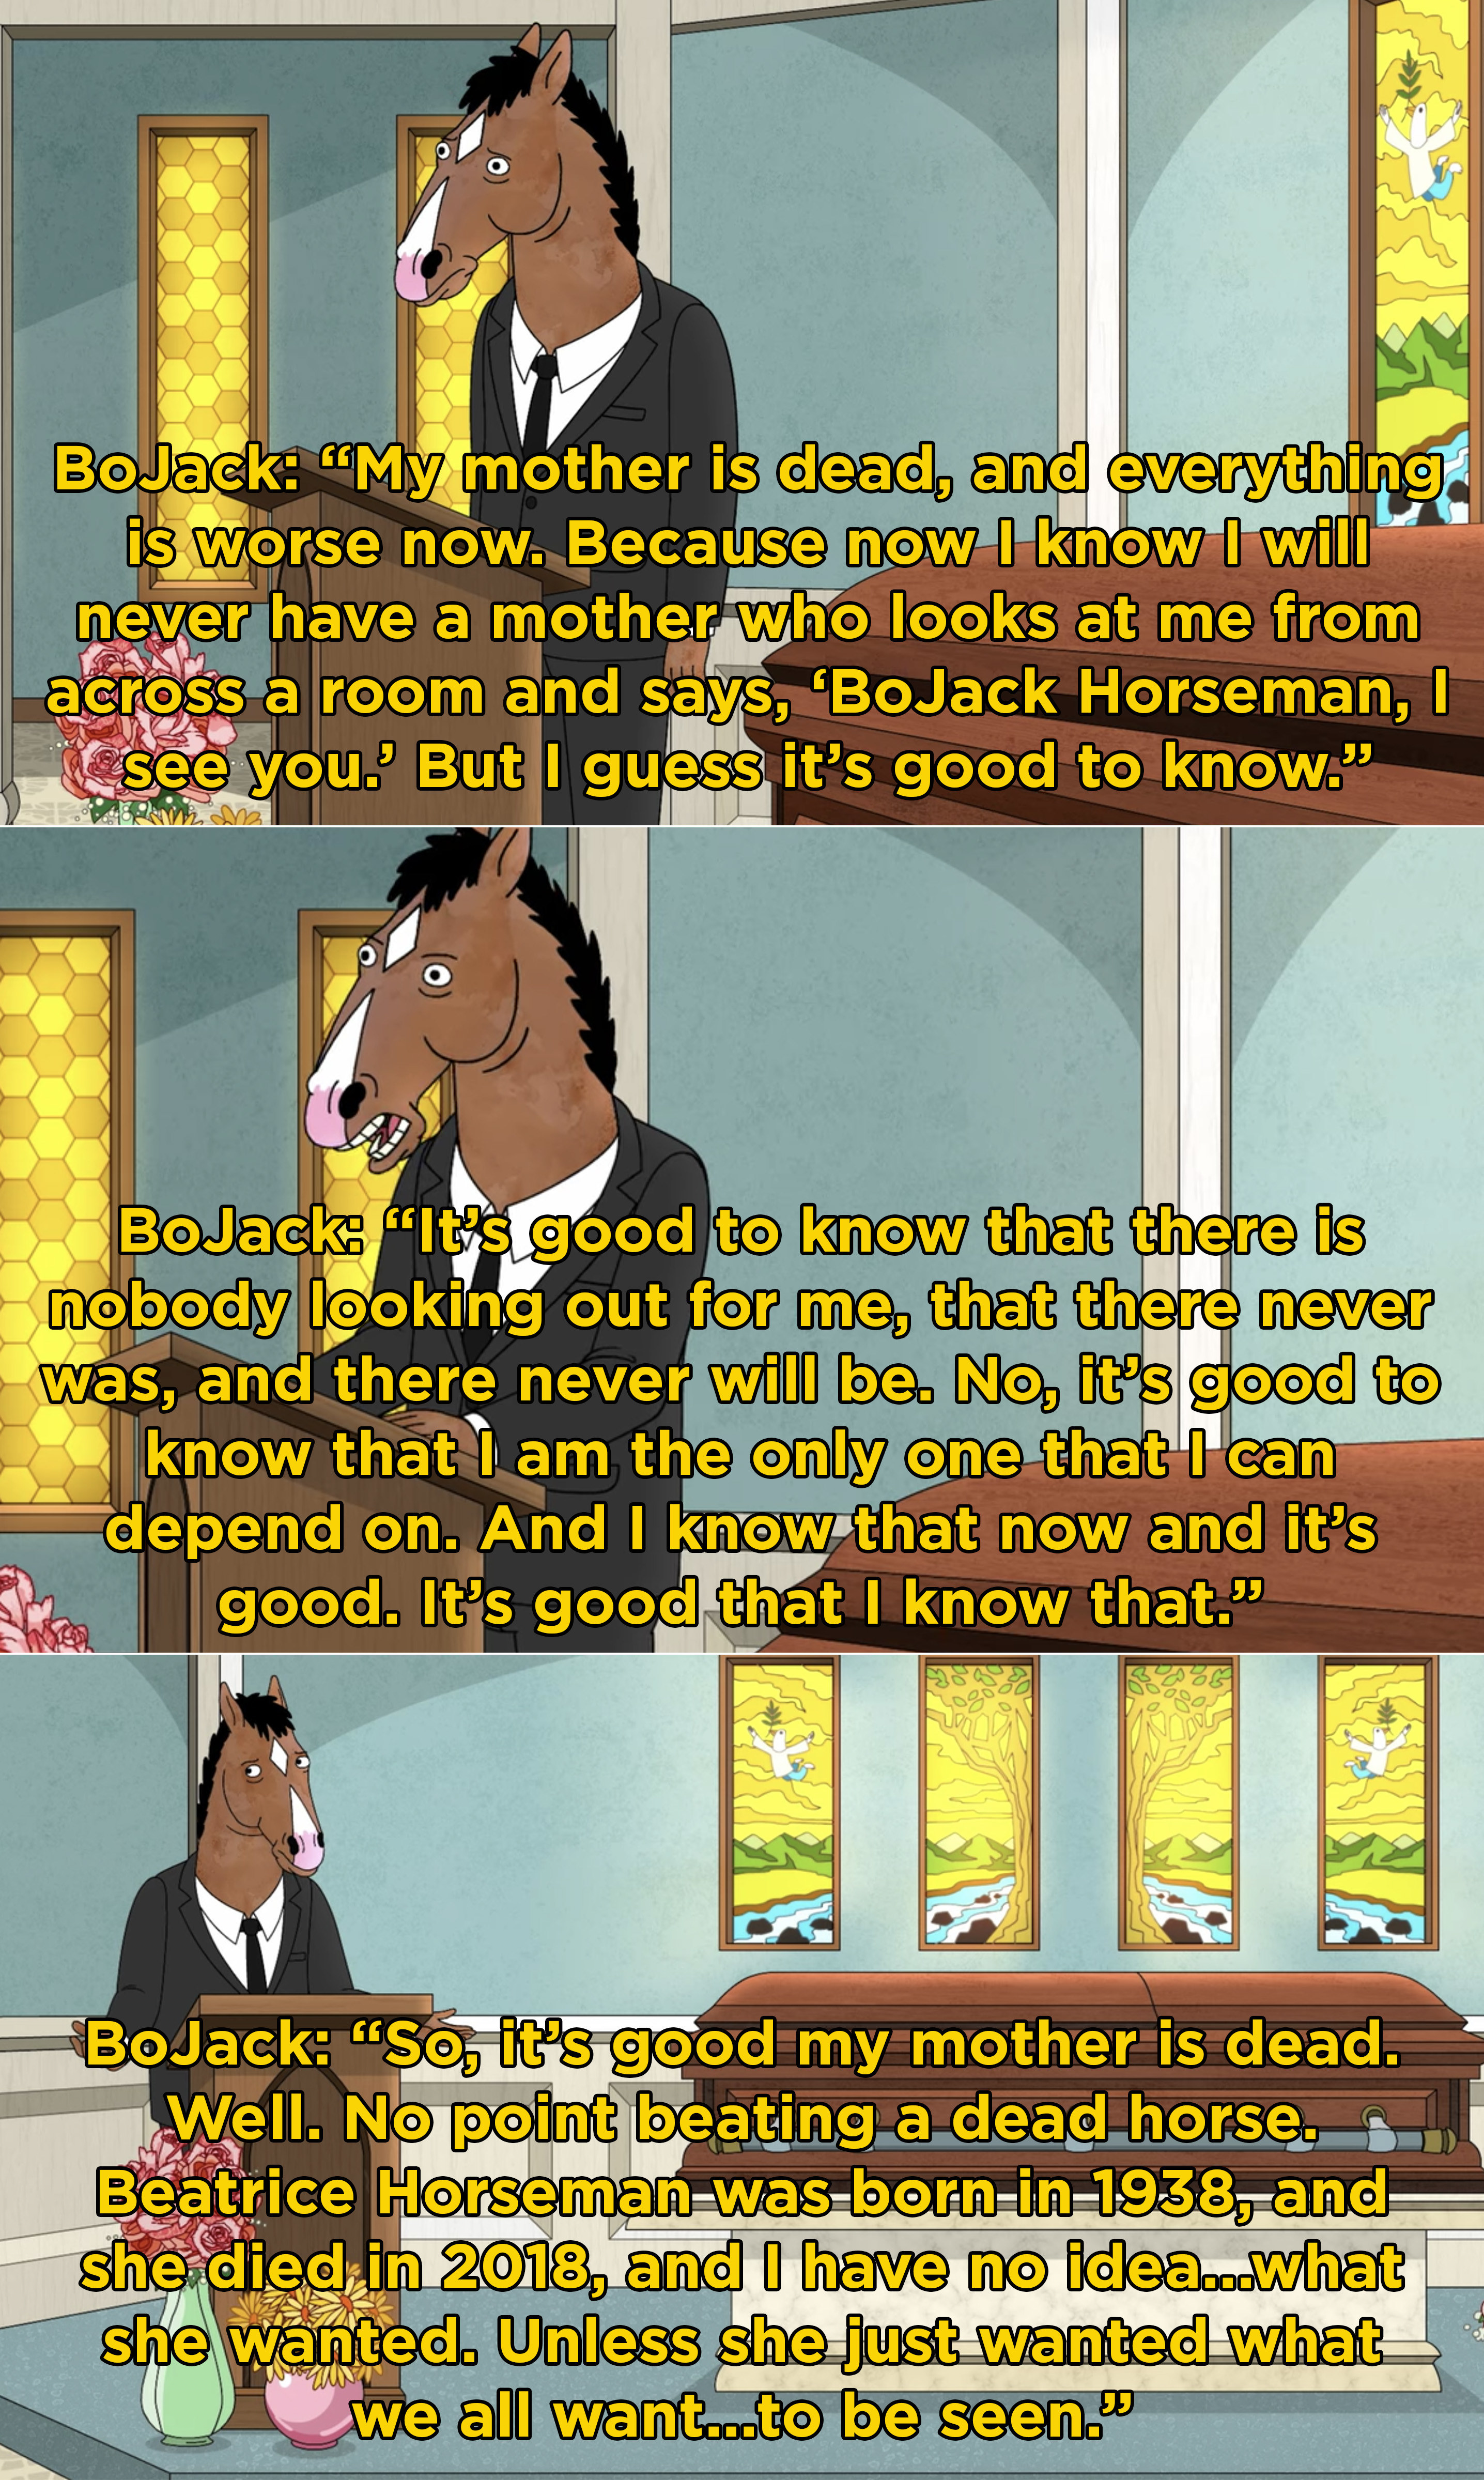 BoJack giving the eulogy at his mom&#x27;s funeral and saying now that she&#x27;s gone there&#x27;s no one looking out for him anymore